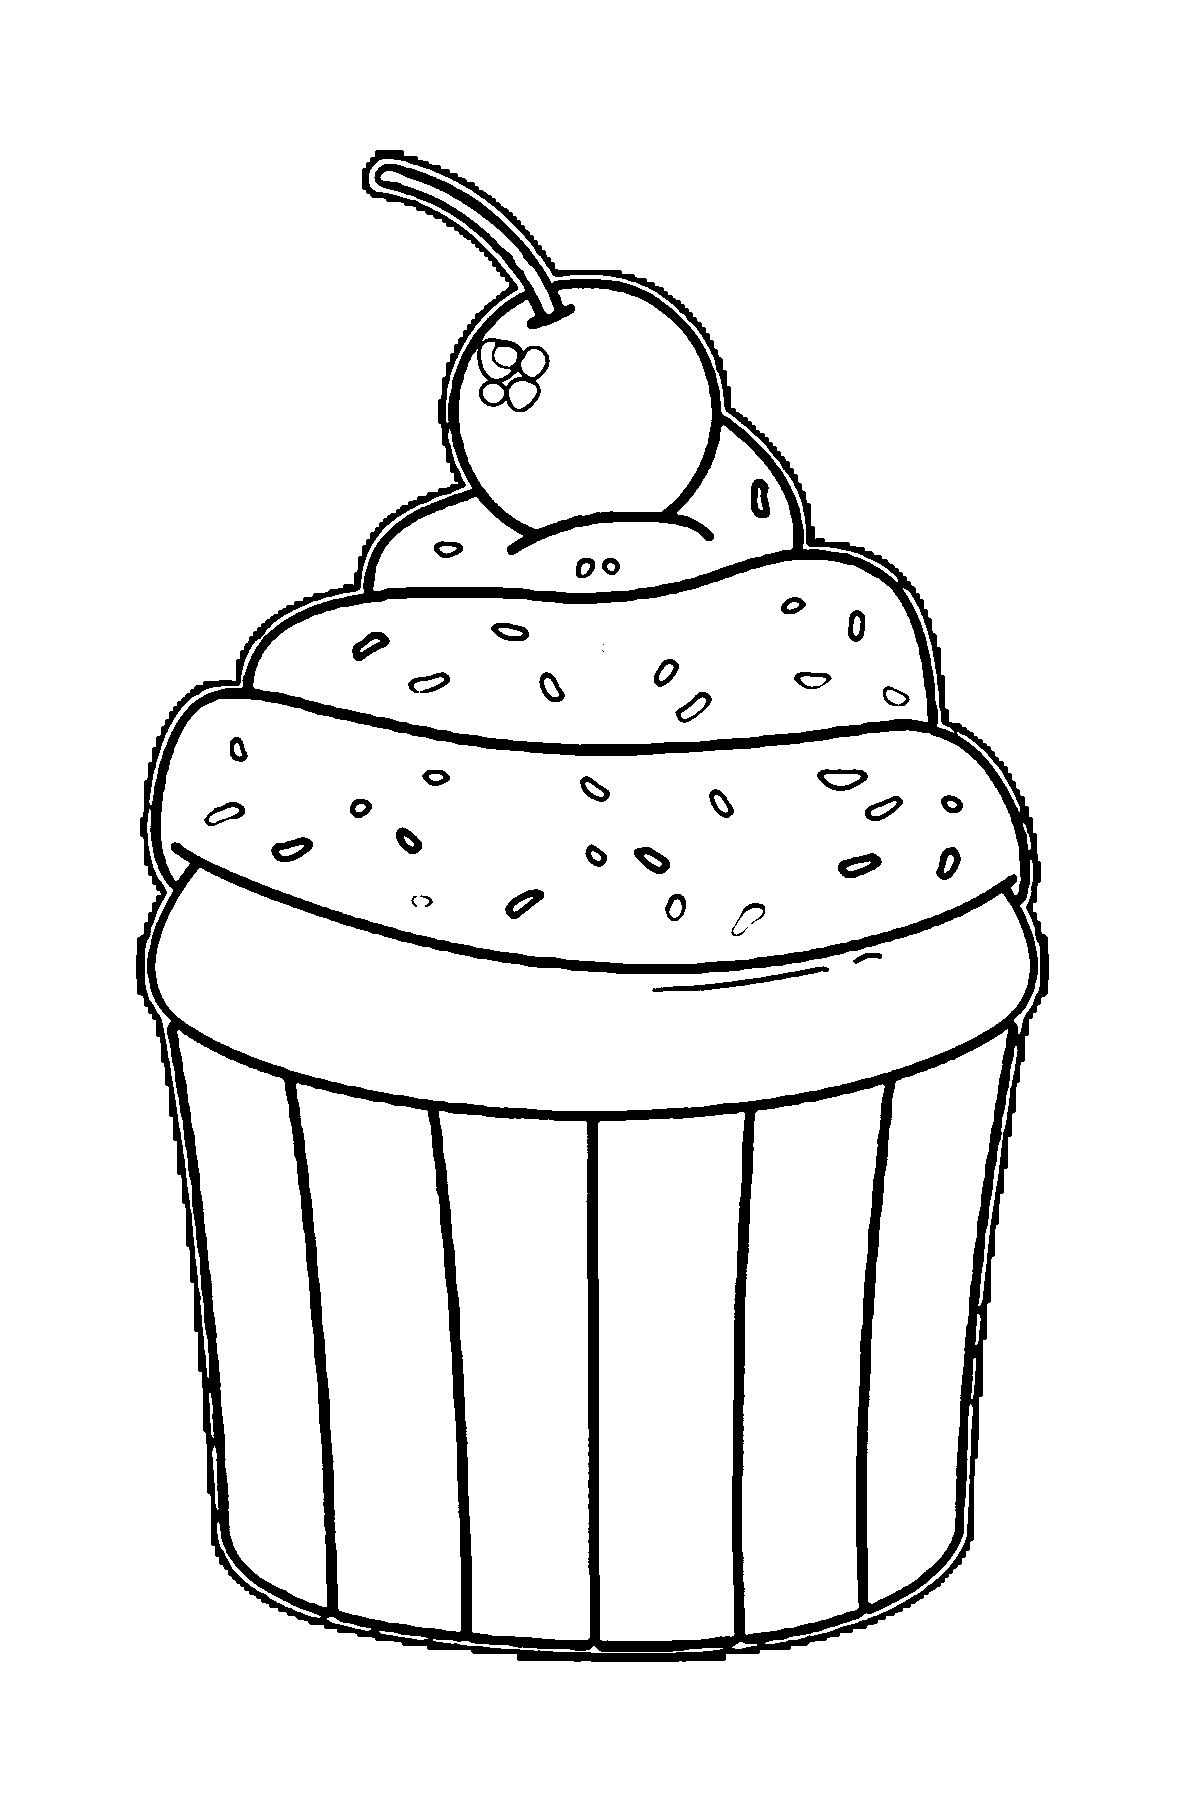 cake coloring page cake coloring pages to download and print for free coloring page cake 